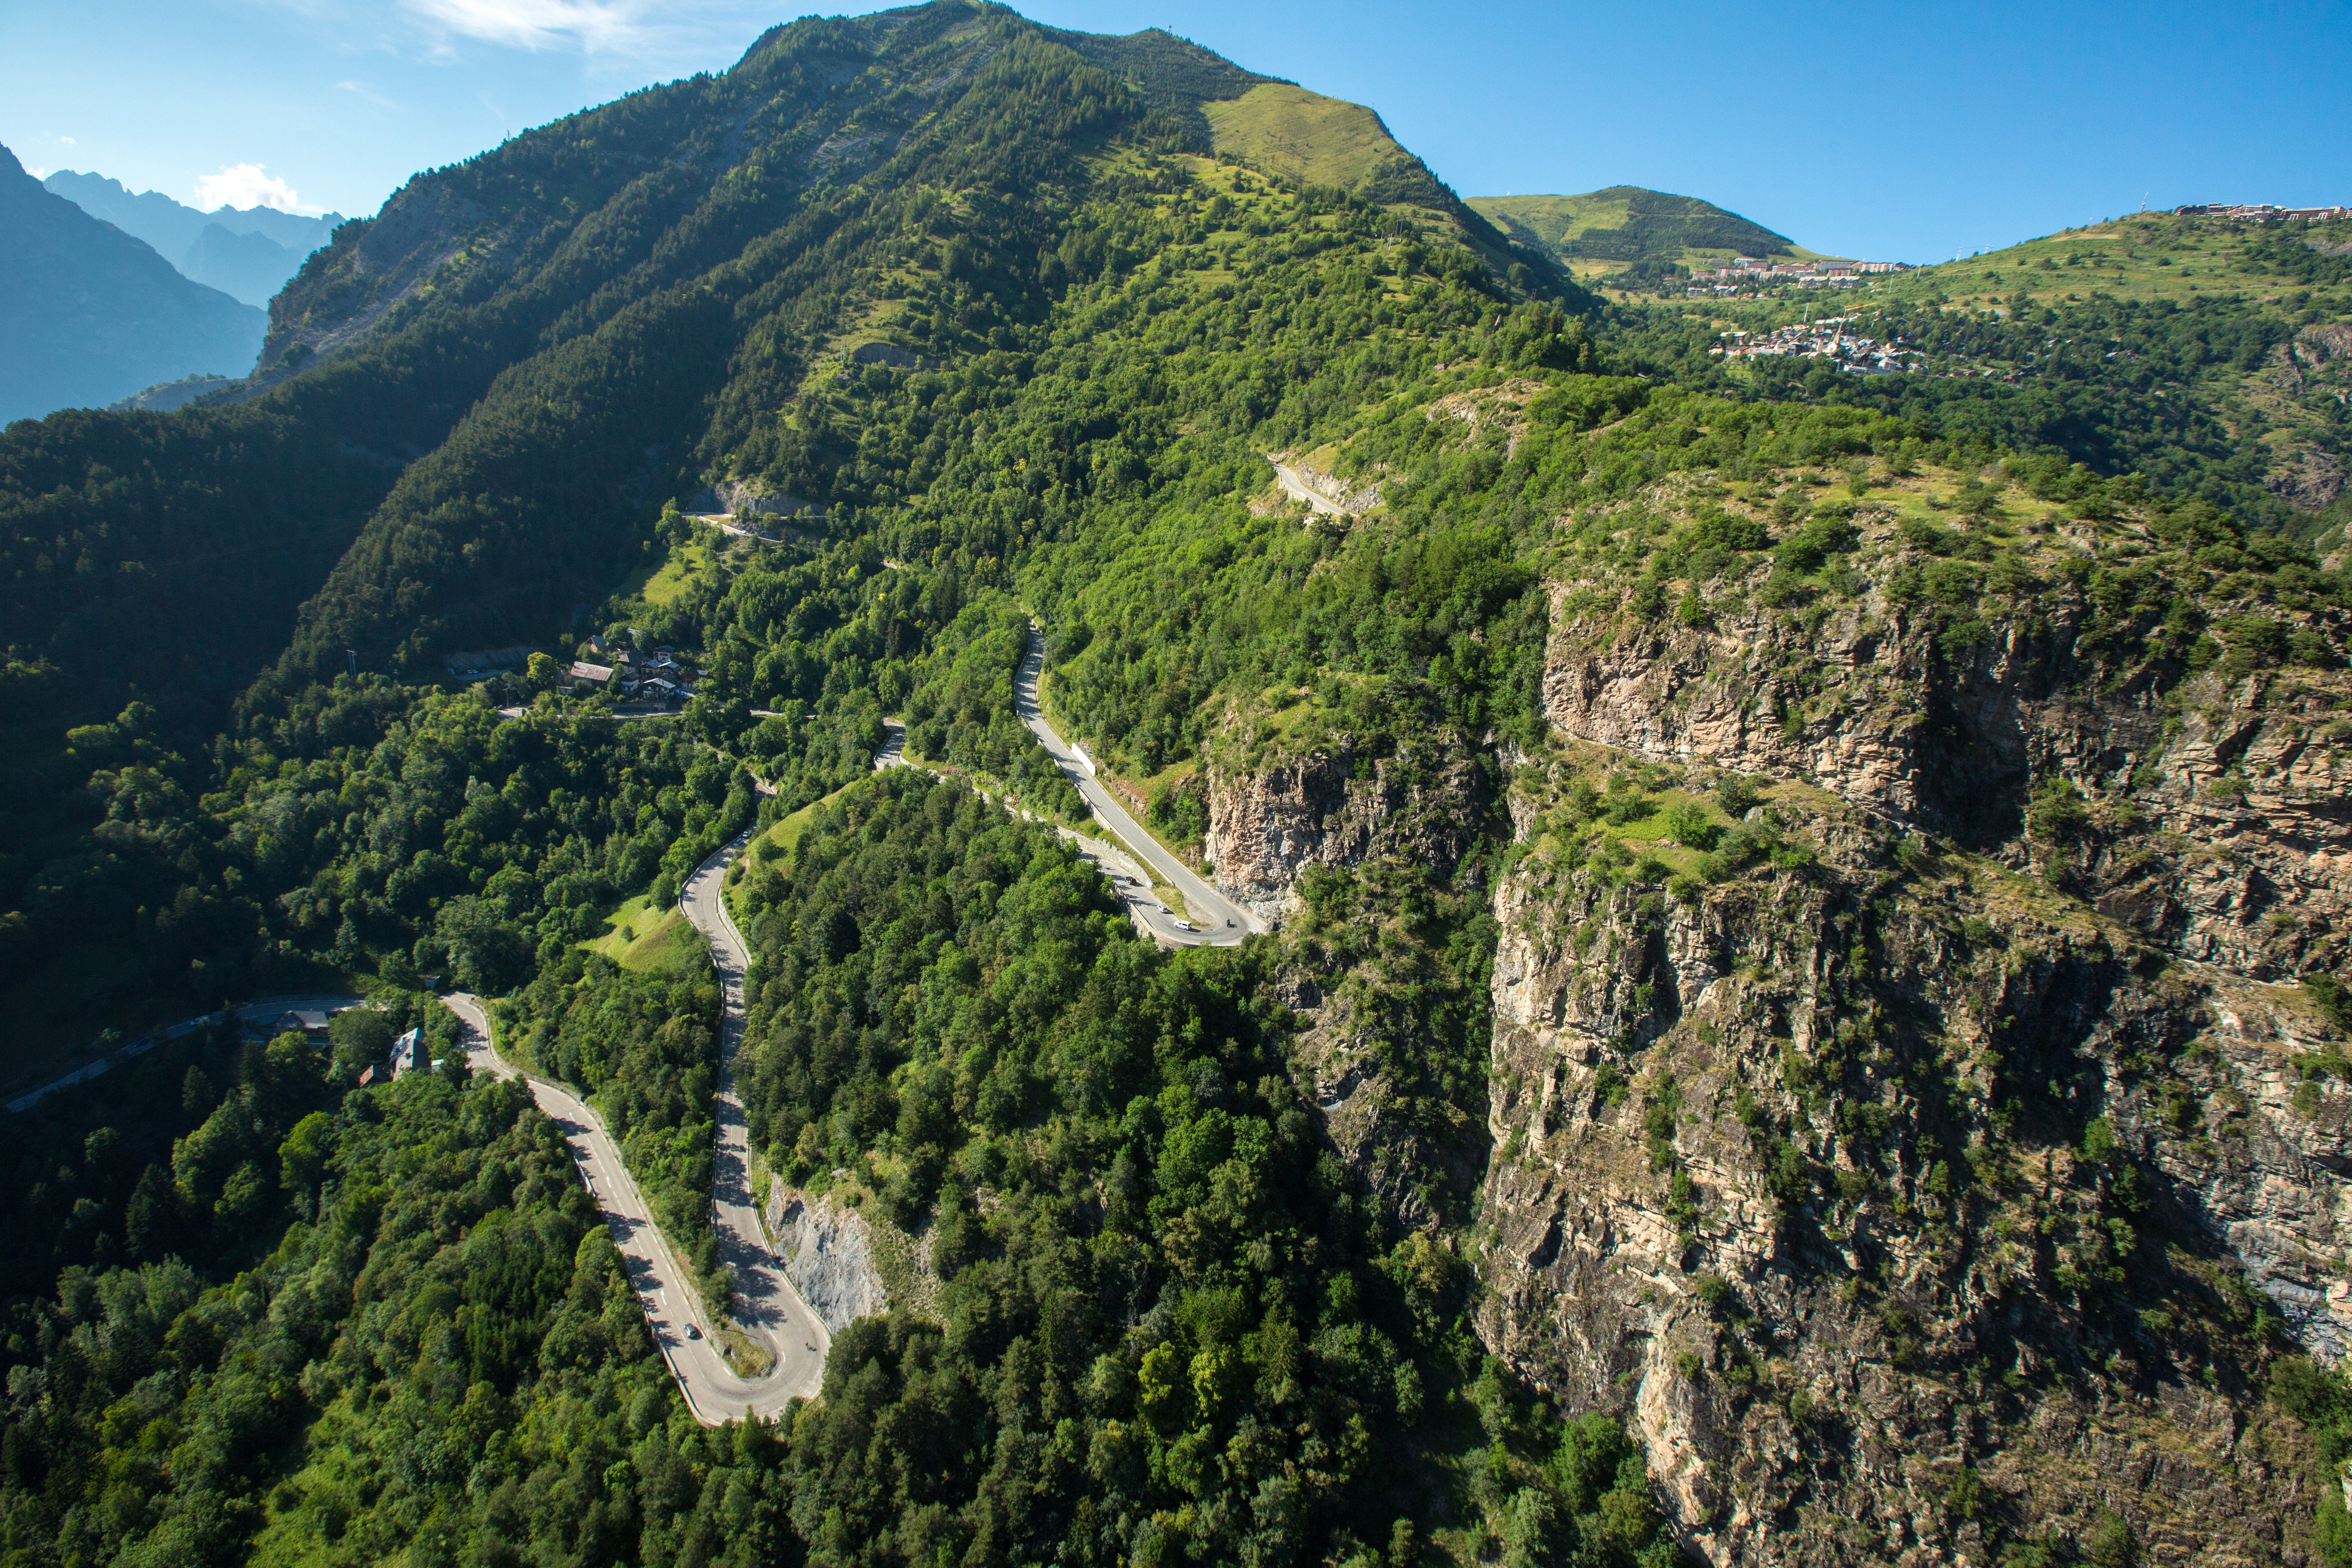 The climb to Alpe d’Huez is challenging for even the best cyclists in the world, but an e-bike makes it more accessible